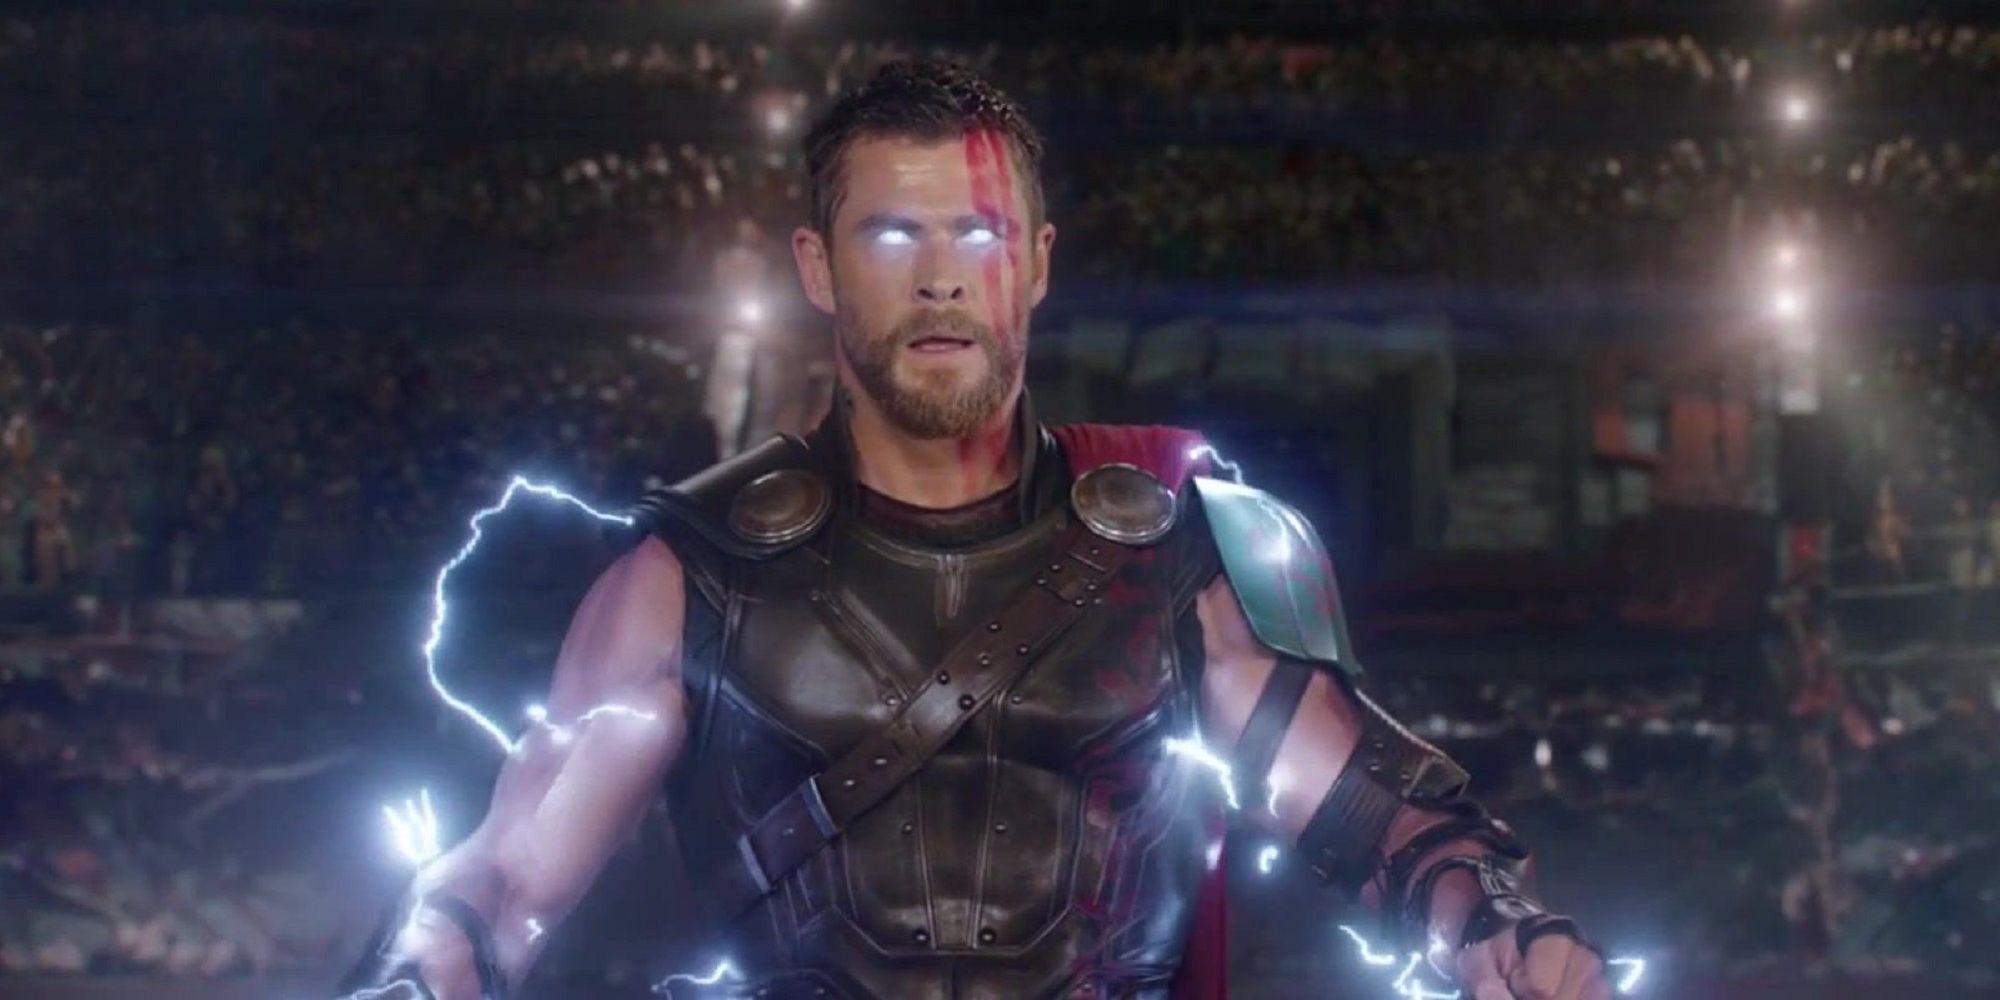 Thor fighting in the arena in Marvel's Thor: Ragnarok.